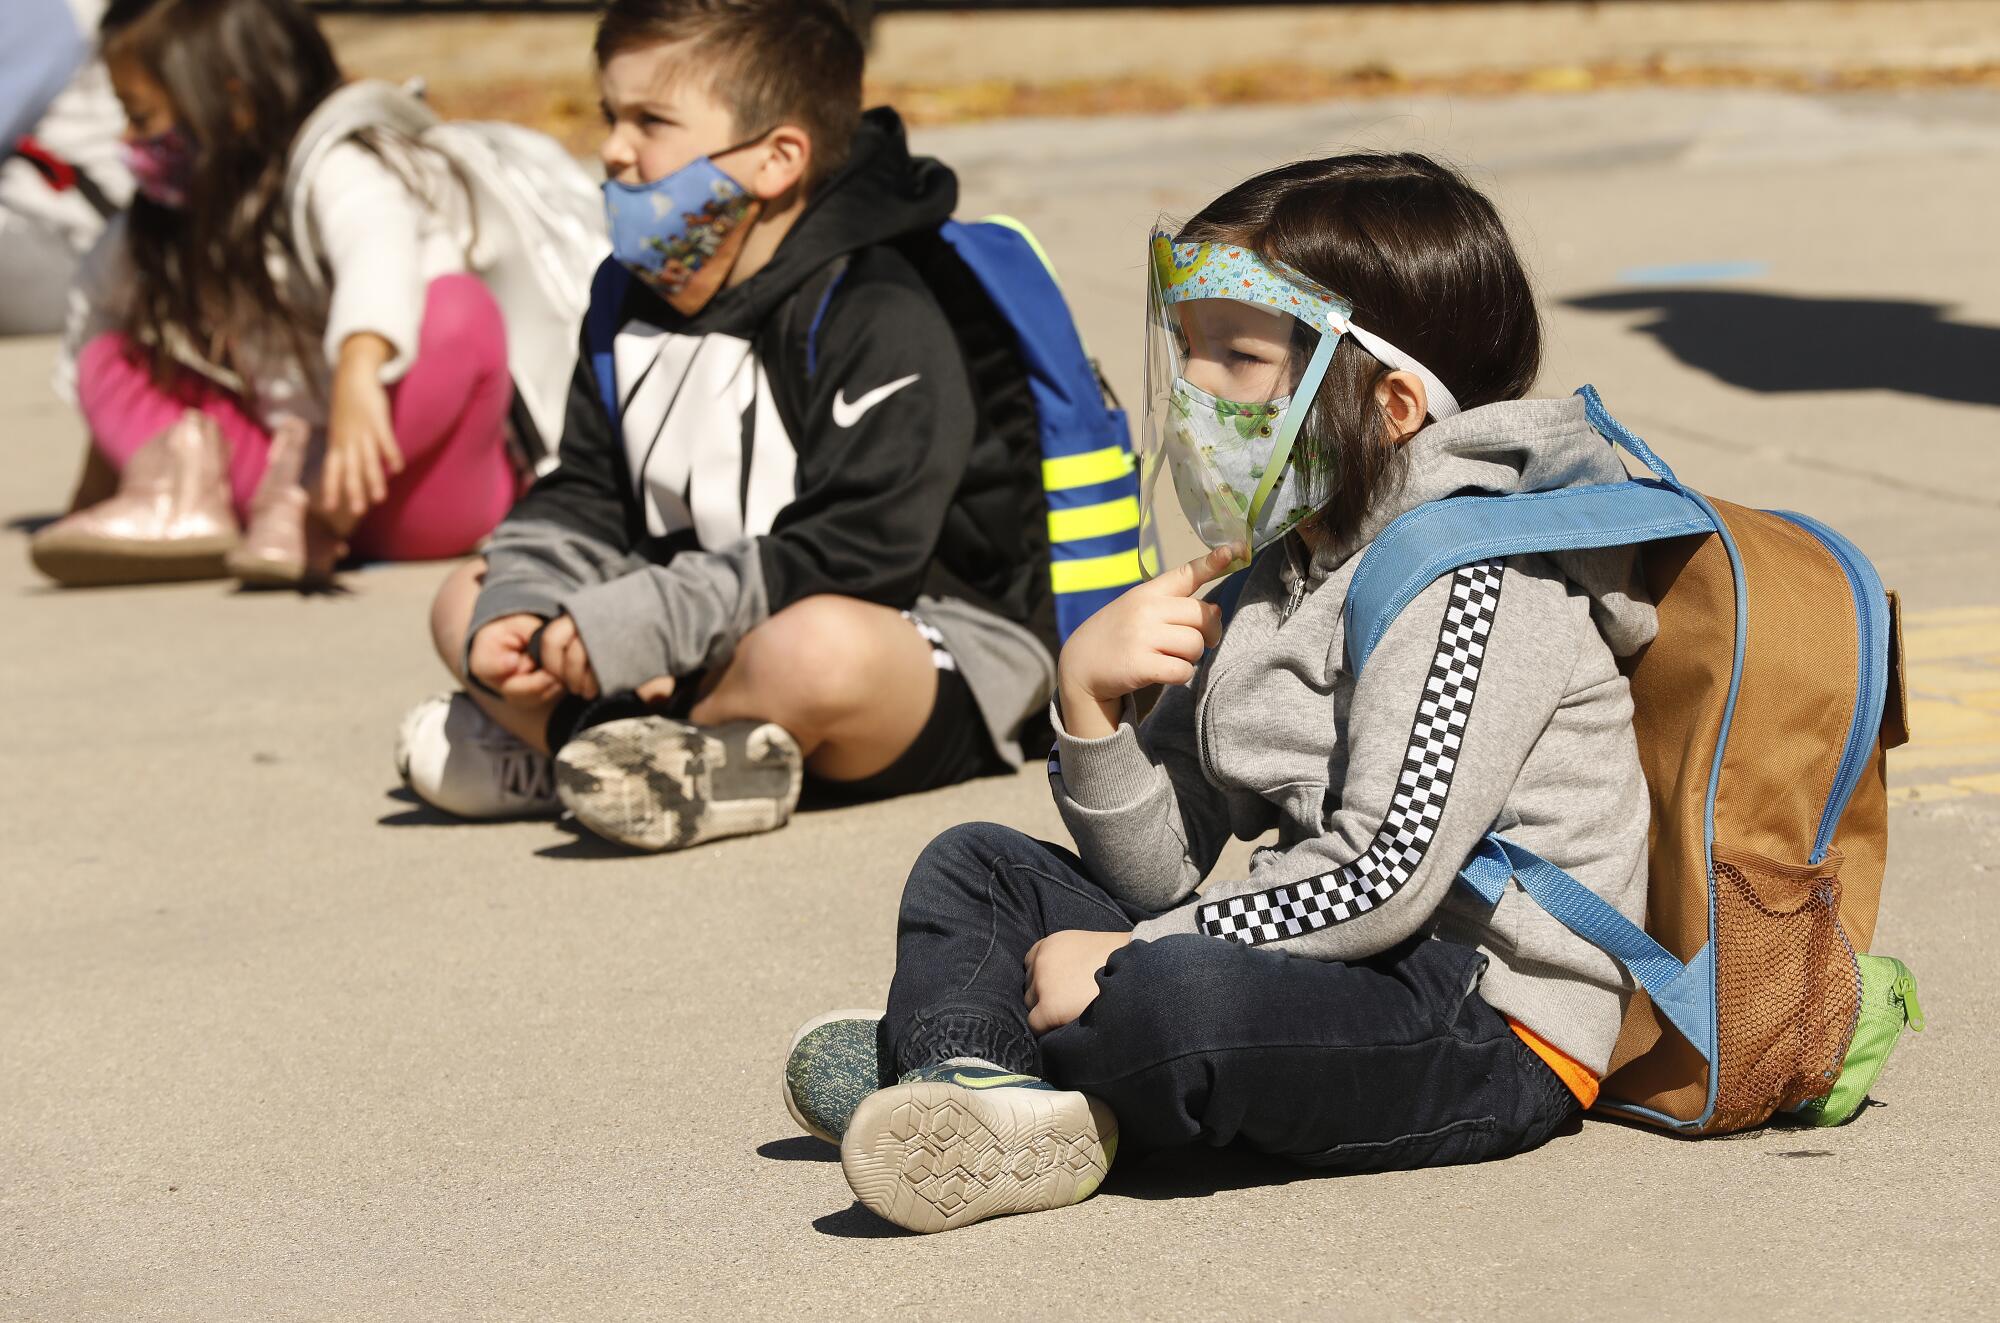 Students wearing backpacks, including a young girl in face mask and shield, sit crosslegged outside school.